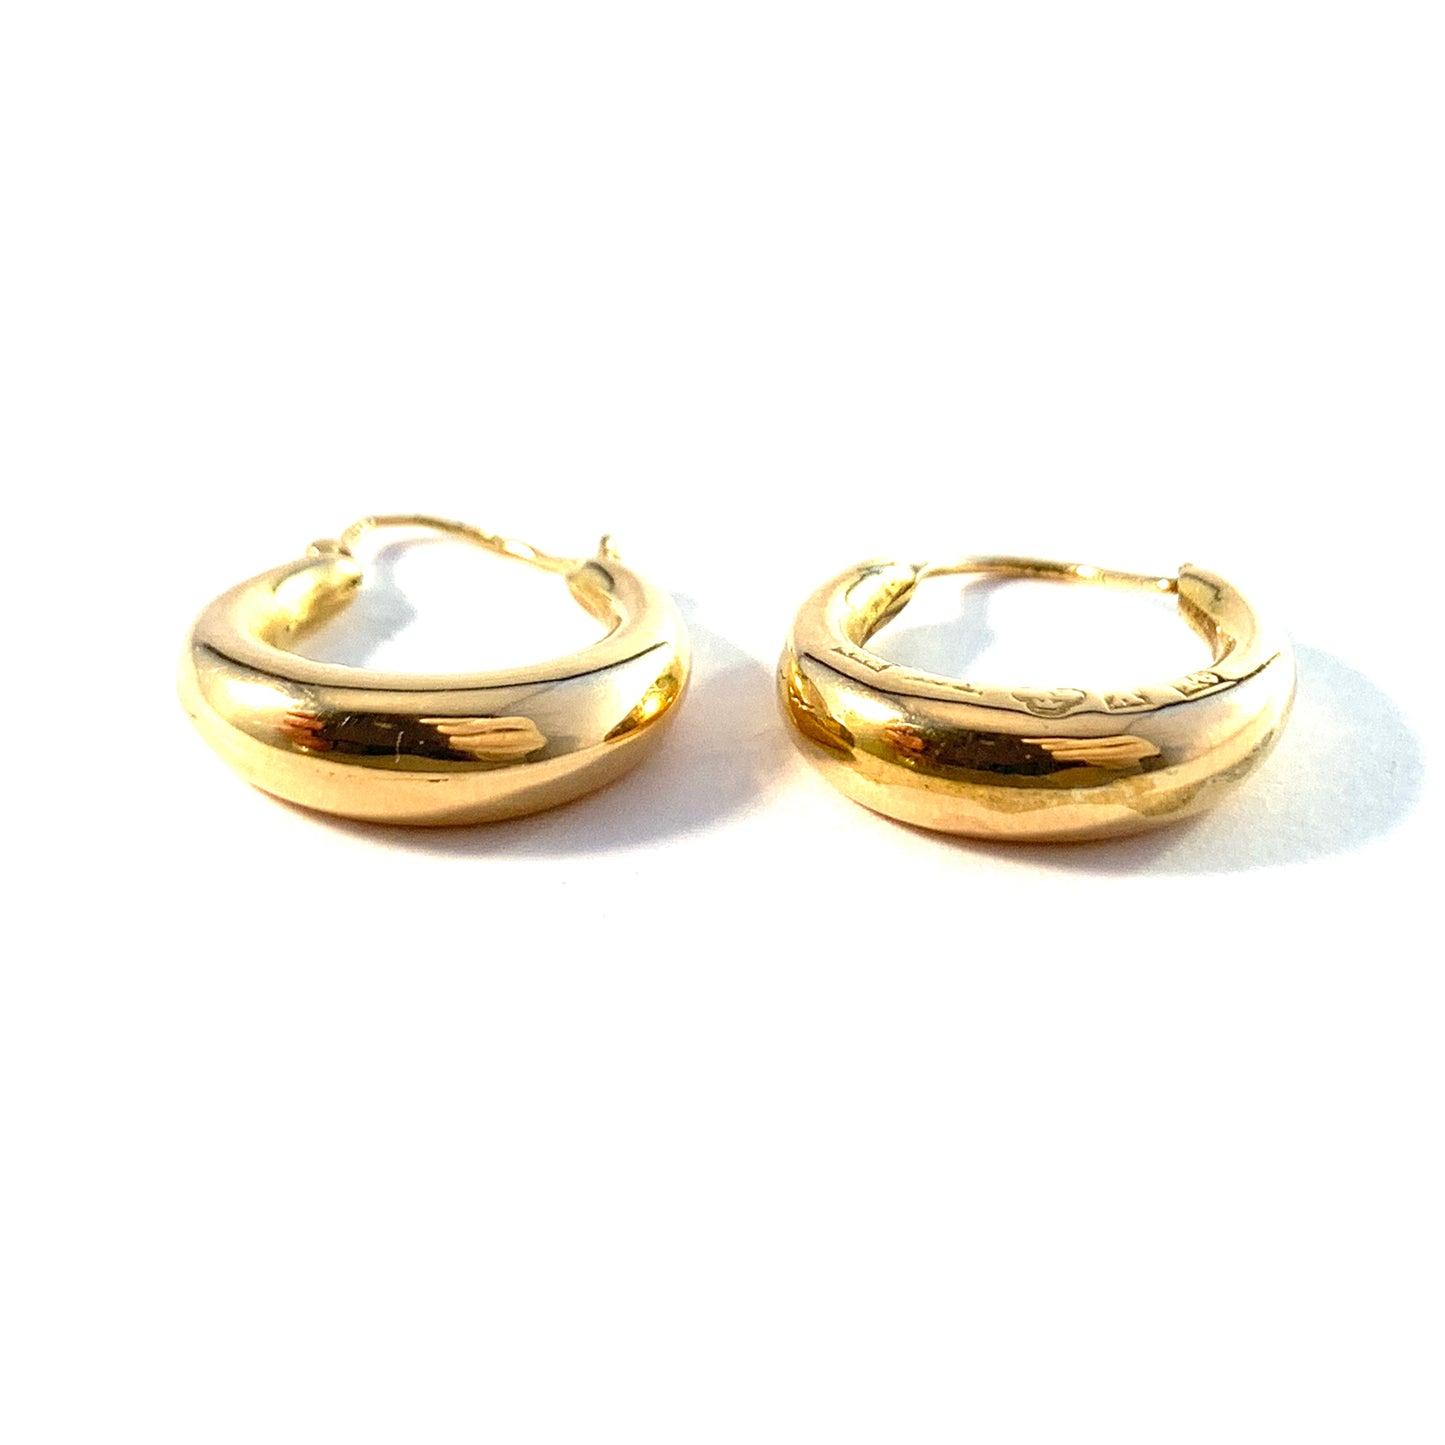 Sweden year 1897 and 1939. Two 18k Gold Earrings. Similar Design.